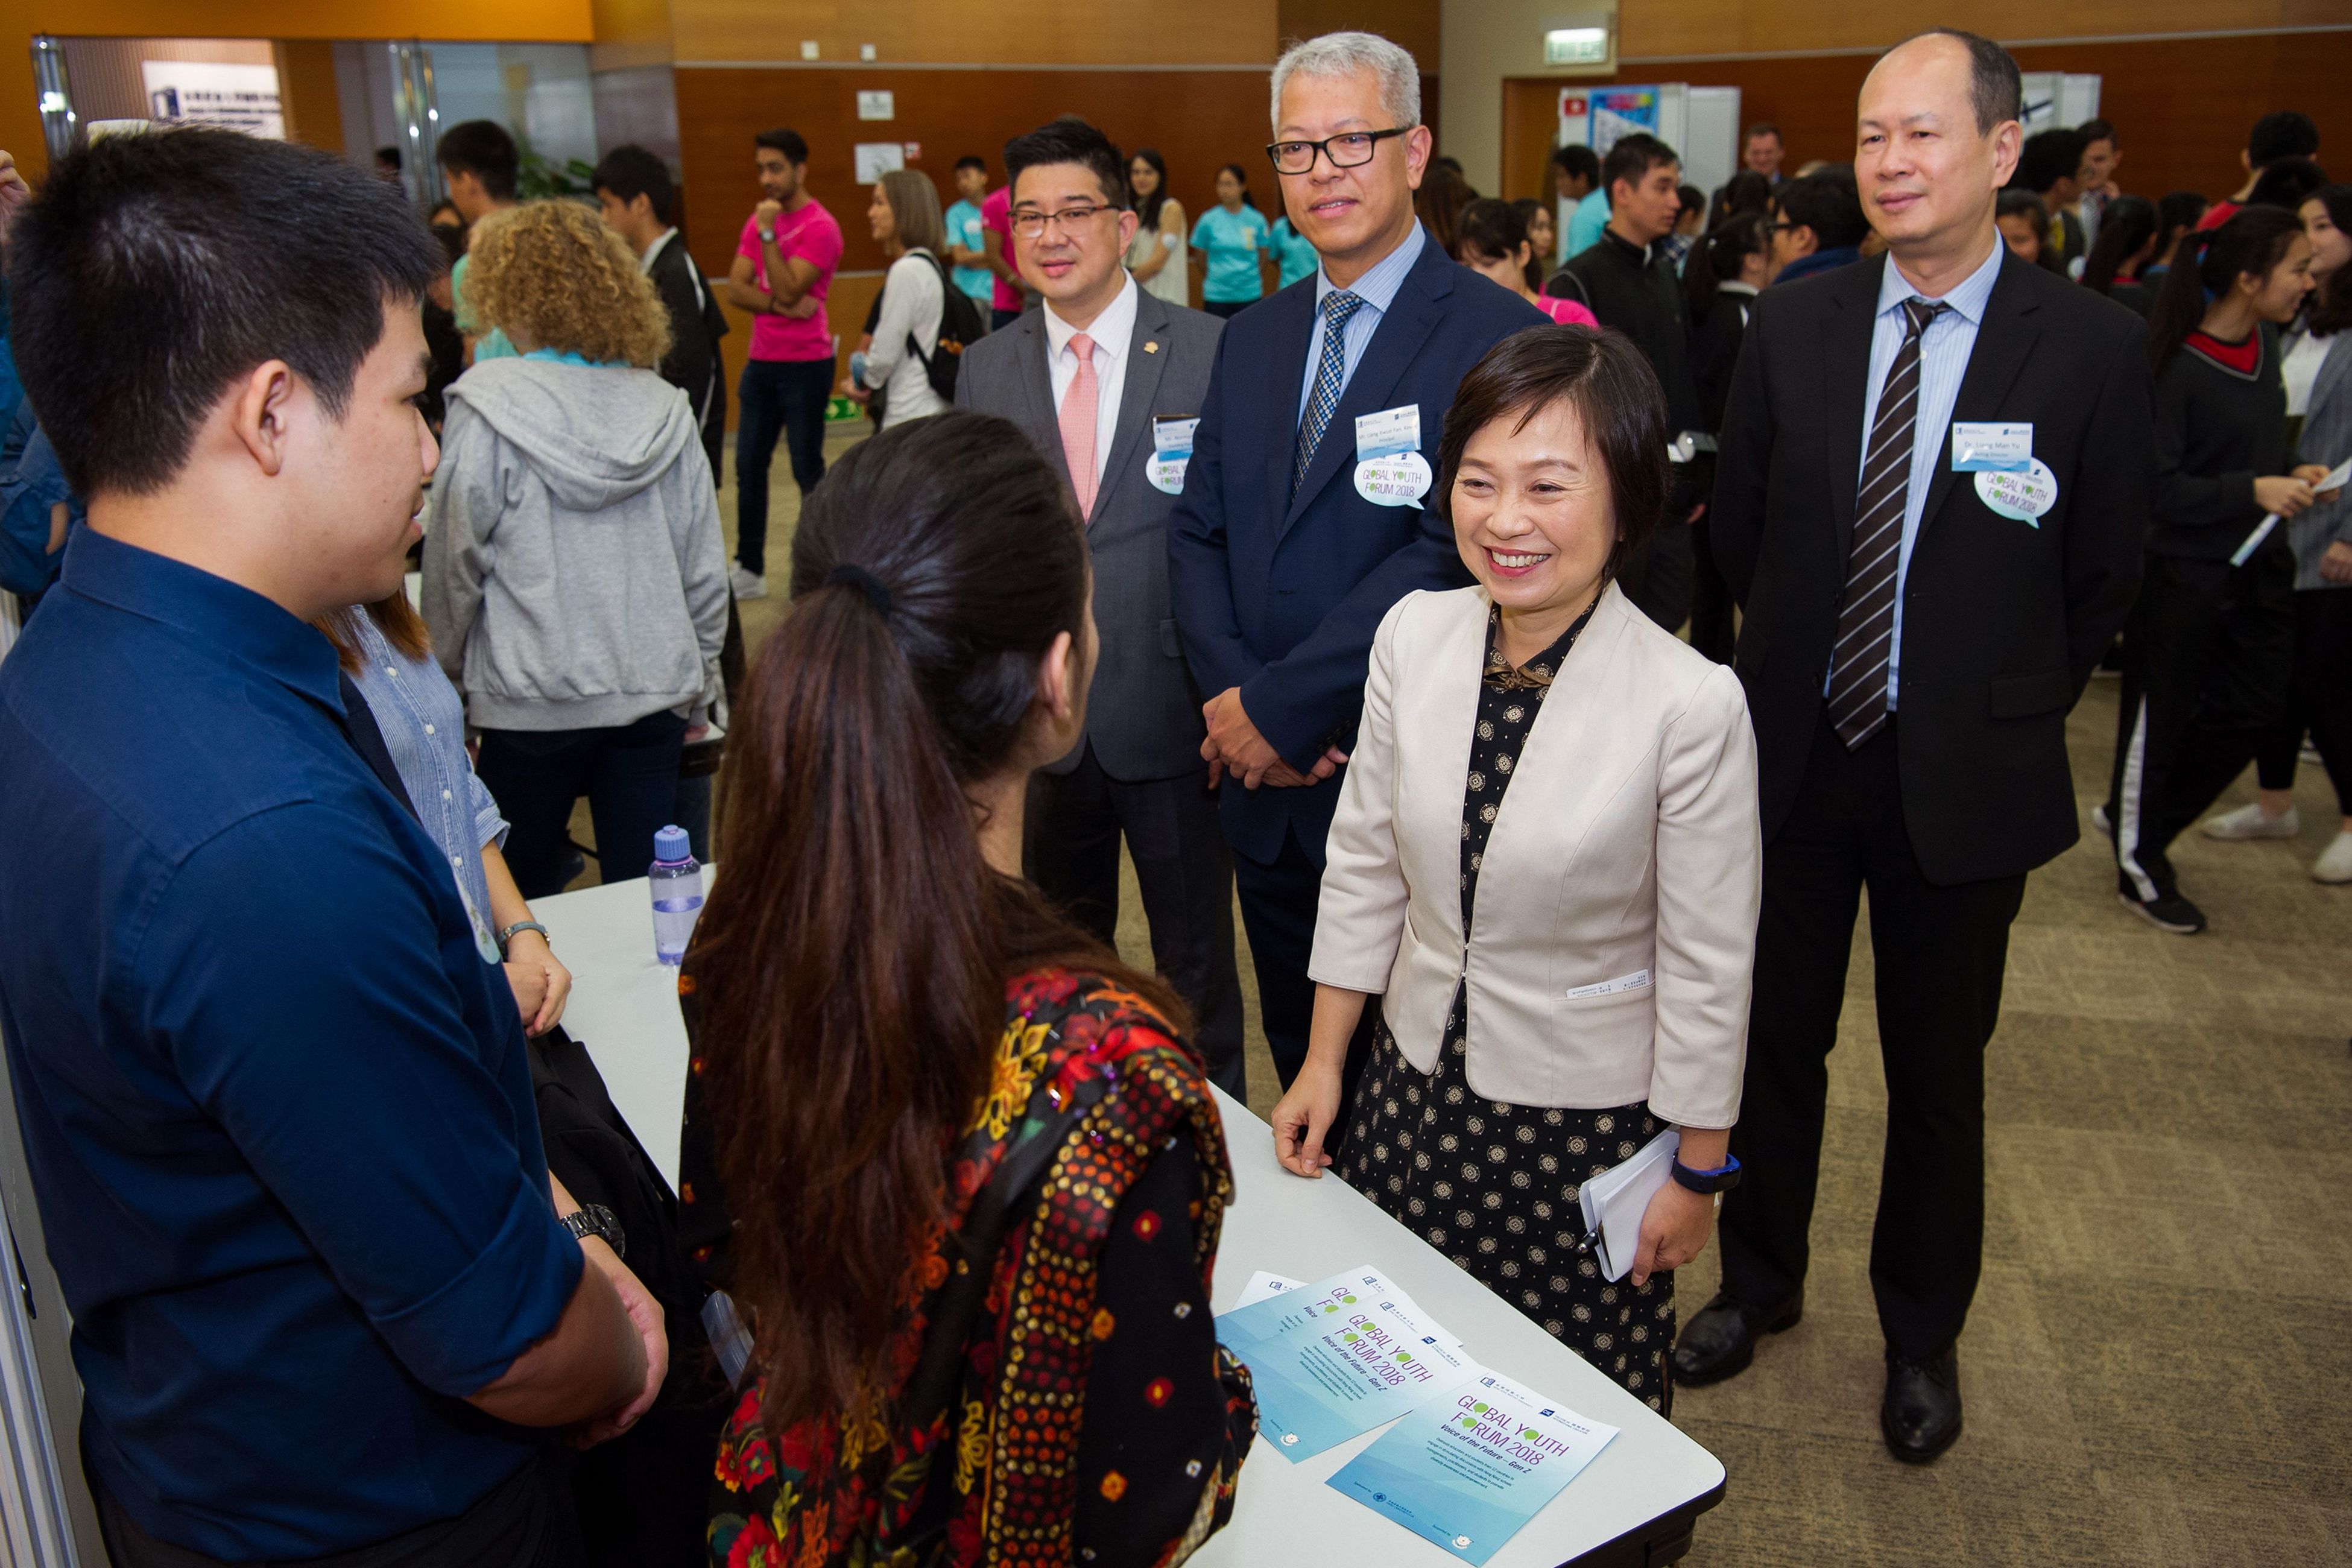 Dr. Choi Yuk-lin was impressed by the students’ sharing at the Poster Forum.